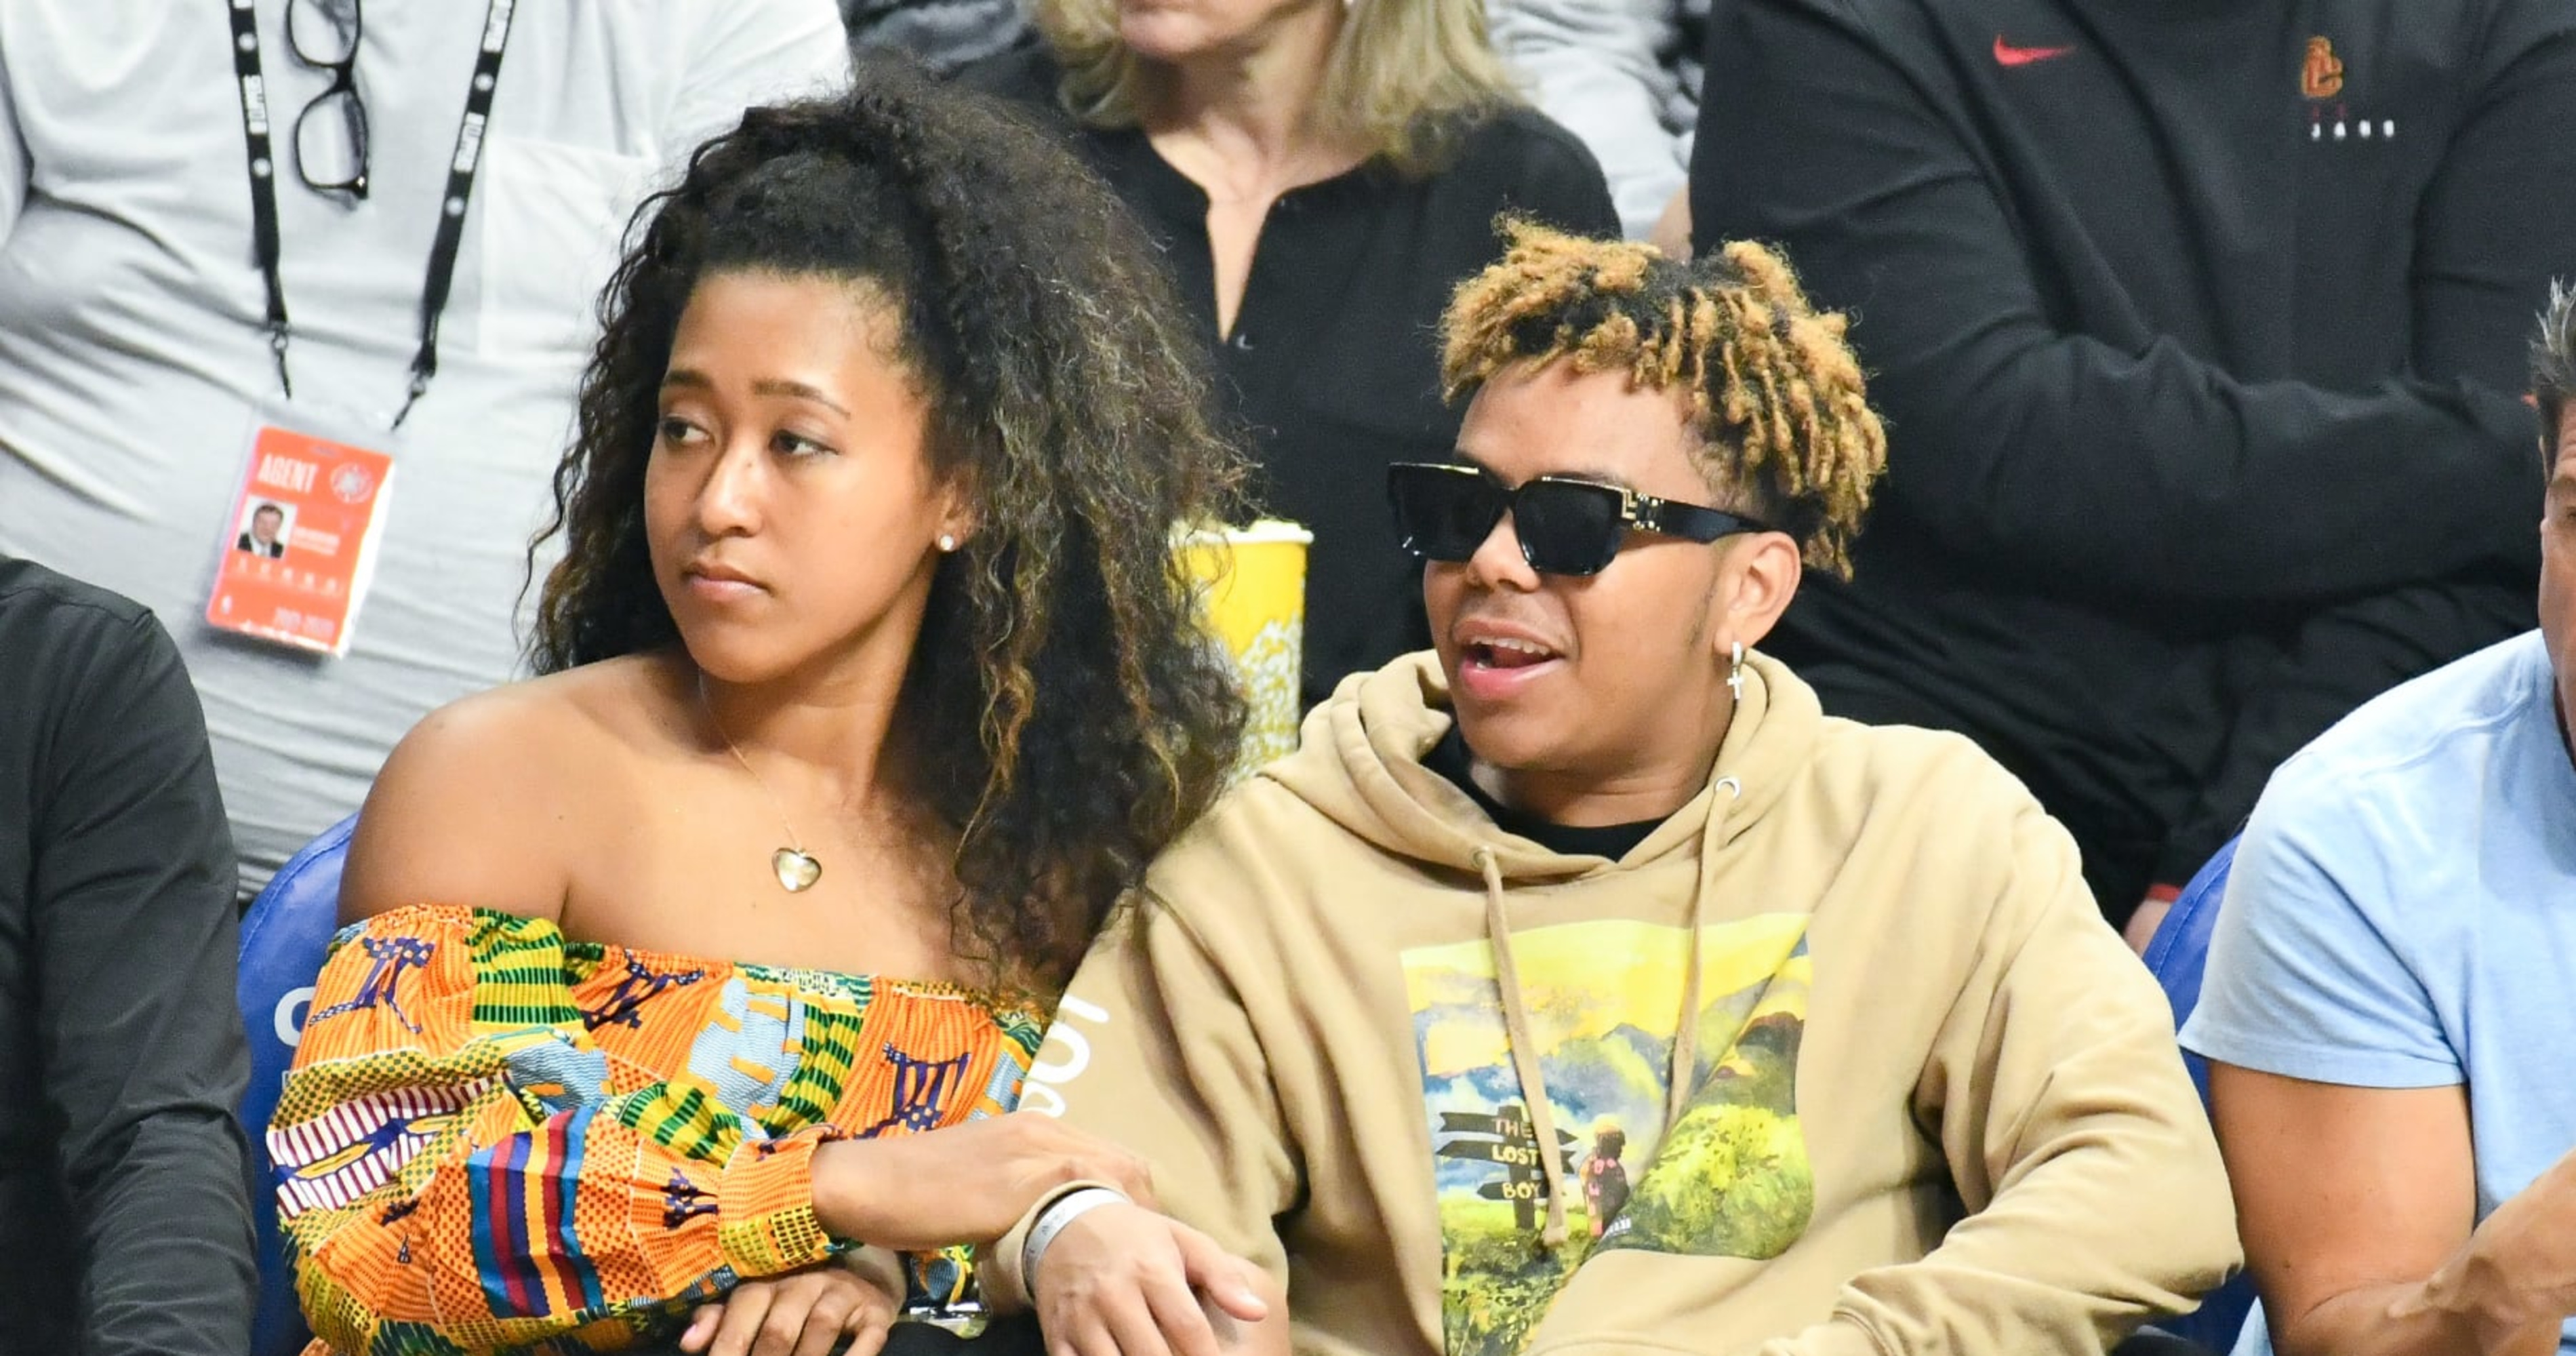 Naomi Osaka Is Pregnant, Expecting First Child With Boyfriend Cordae